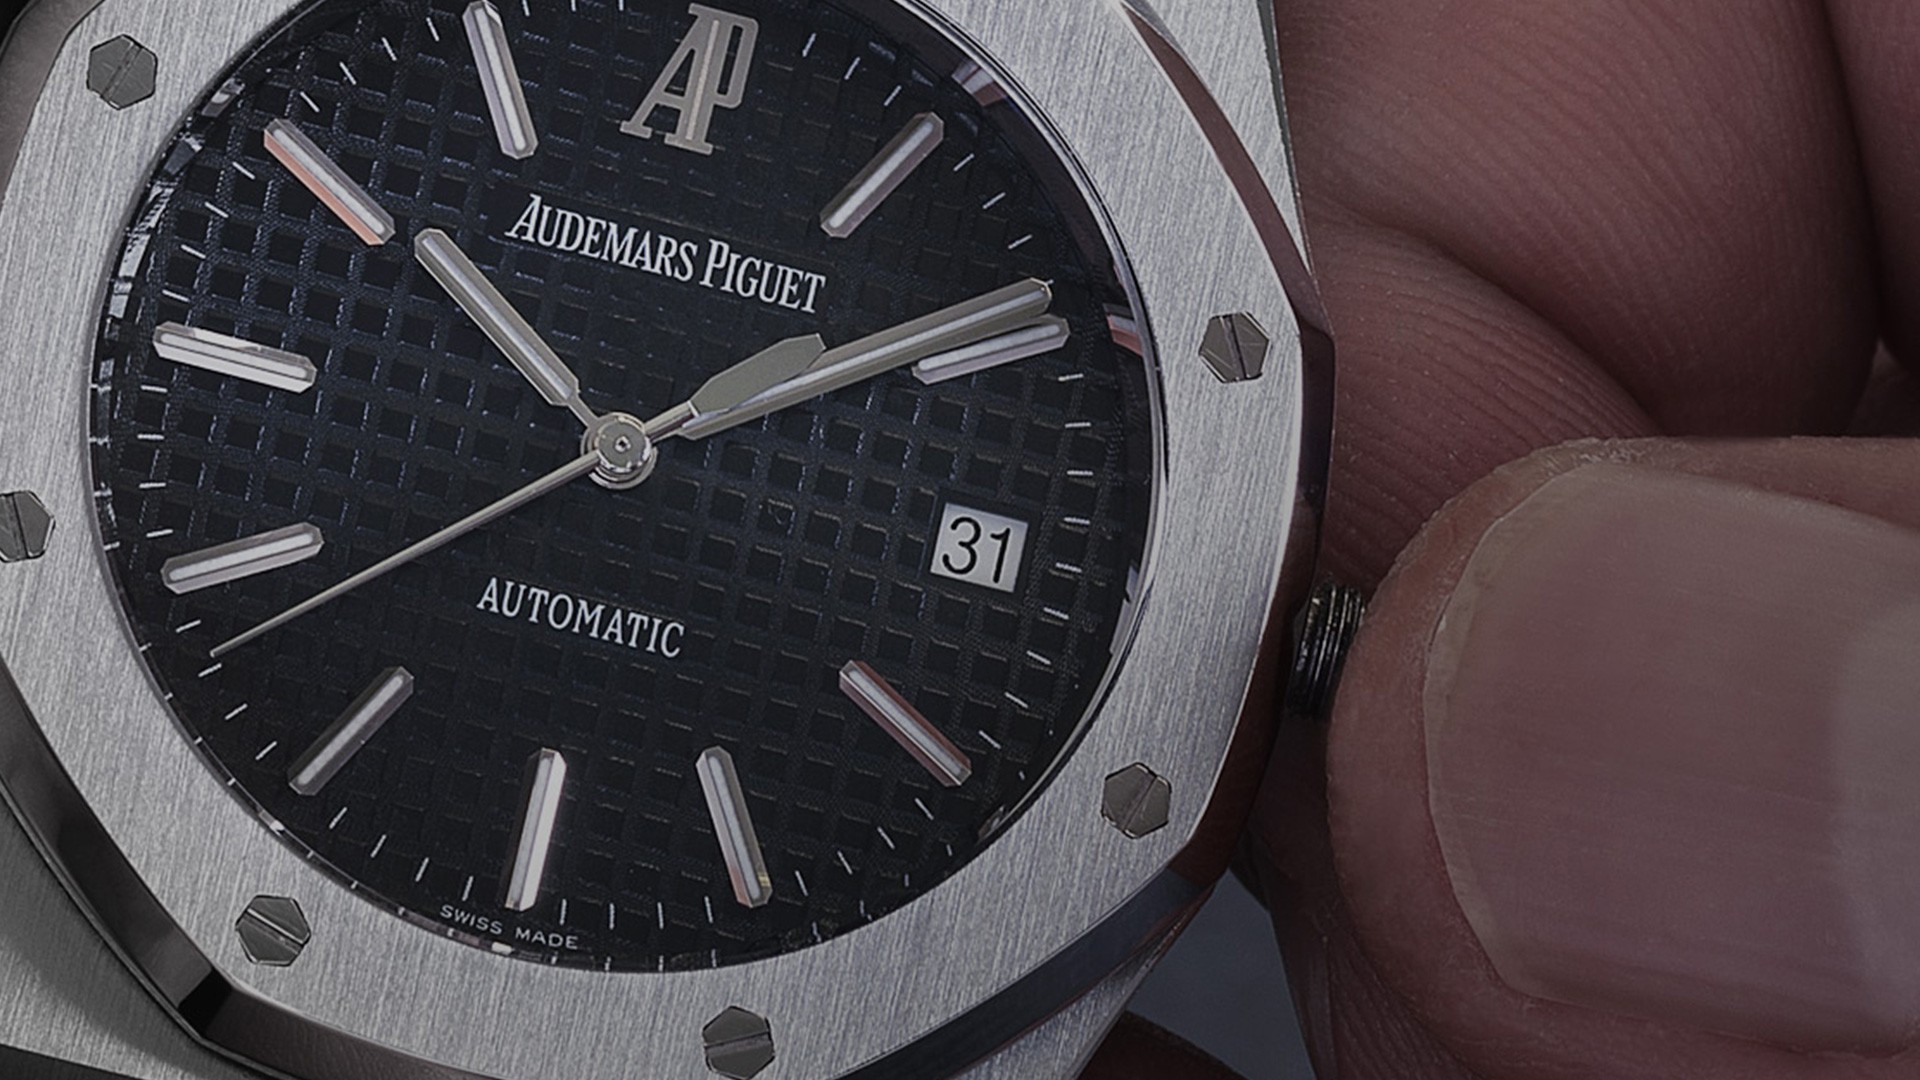 Audemars Piguet Royal Oak Offshore Diver Stainless Steel White Dial 15710ST. OO. A010CA.01